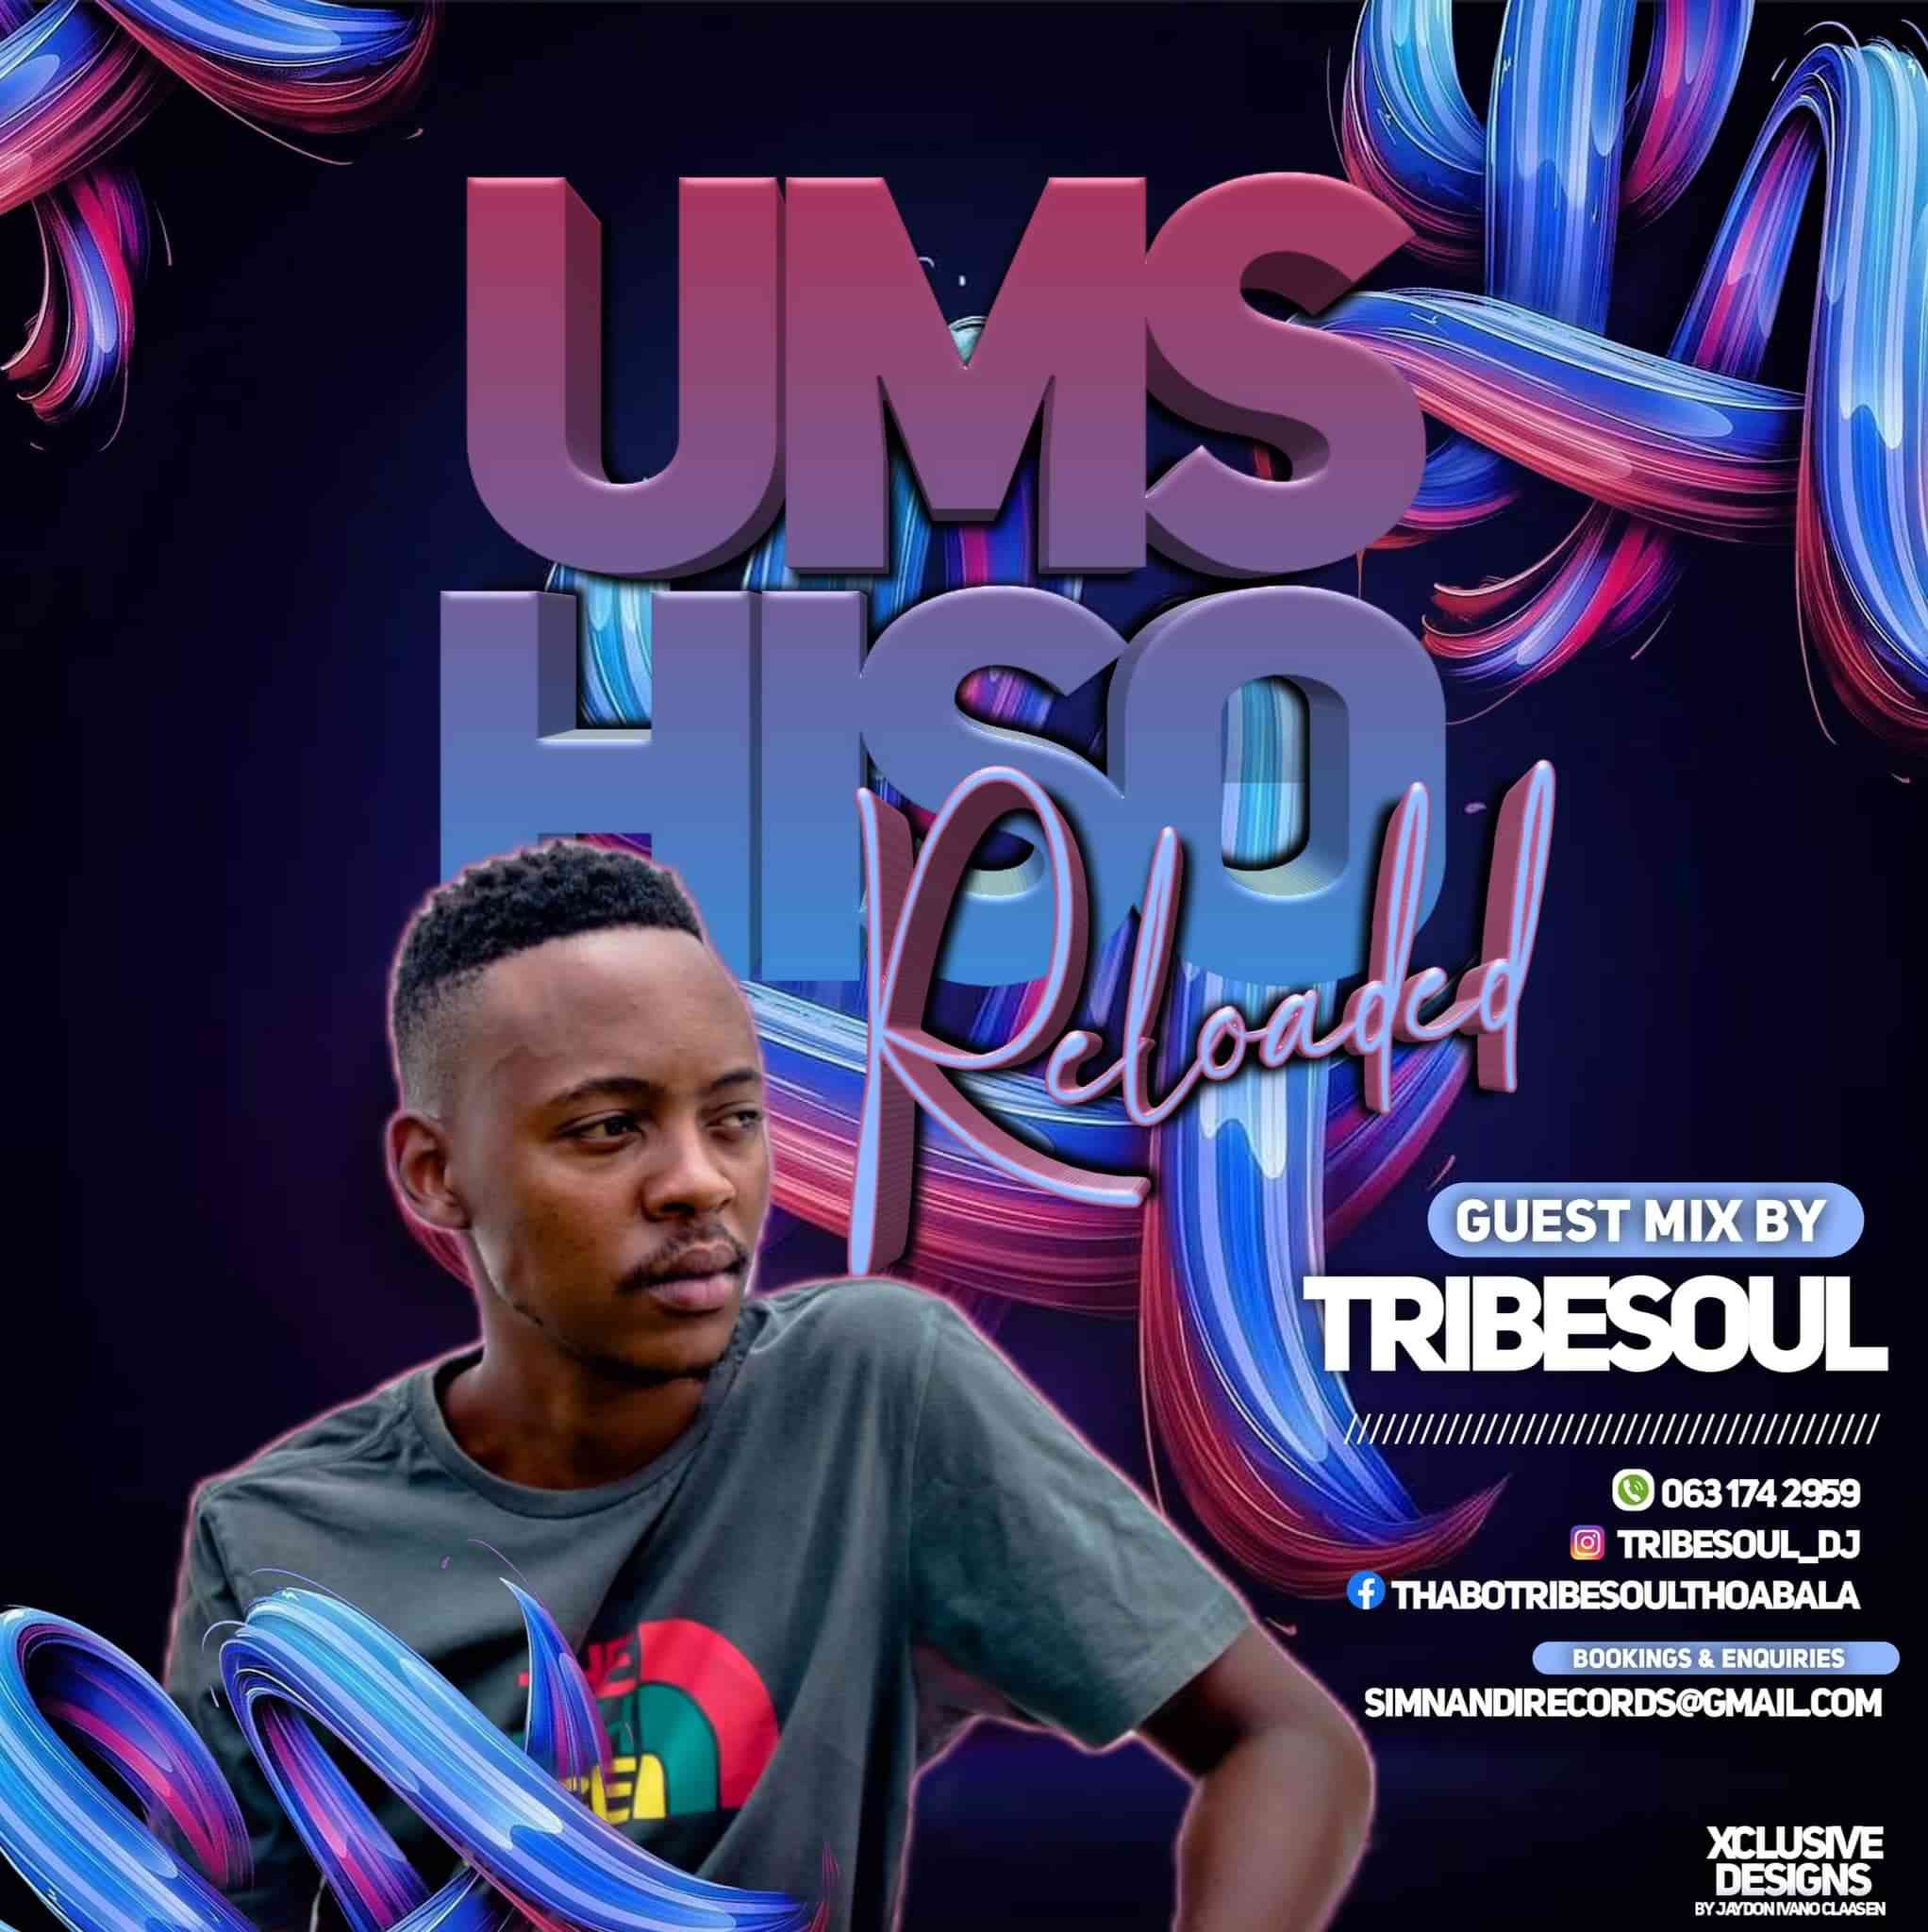 TribeSoul Umshiso Reloaded (Guest Mix)